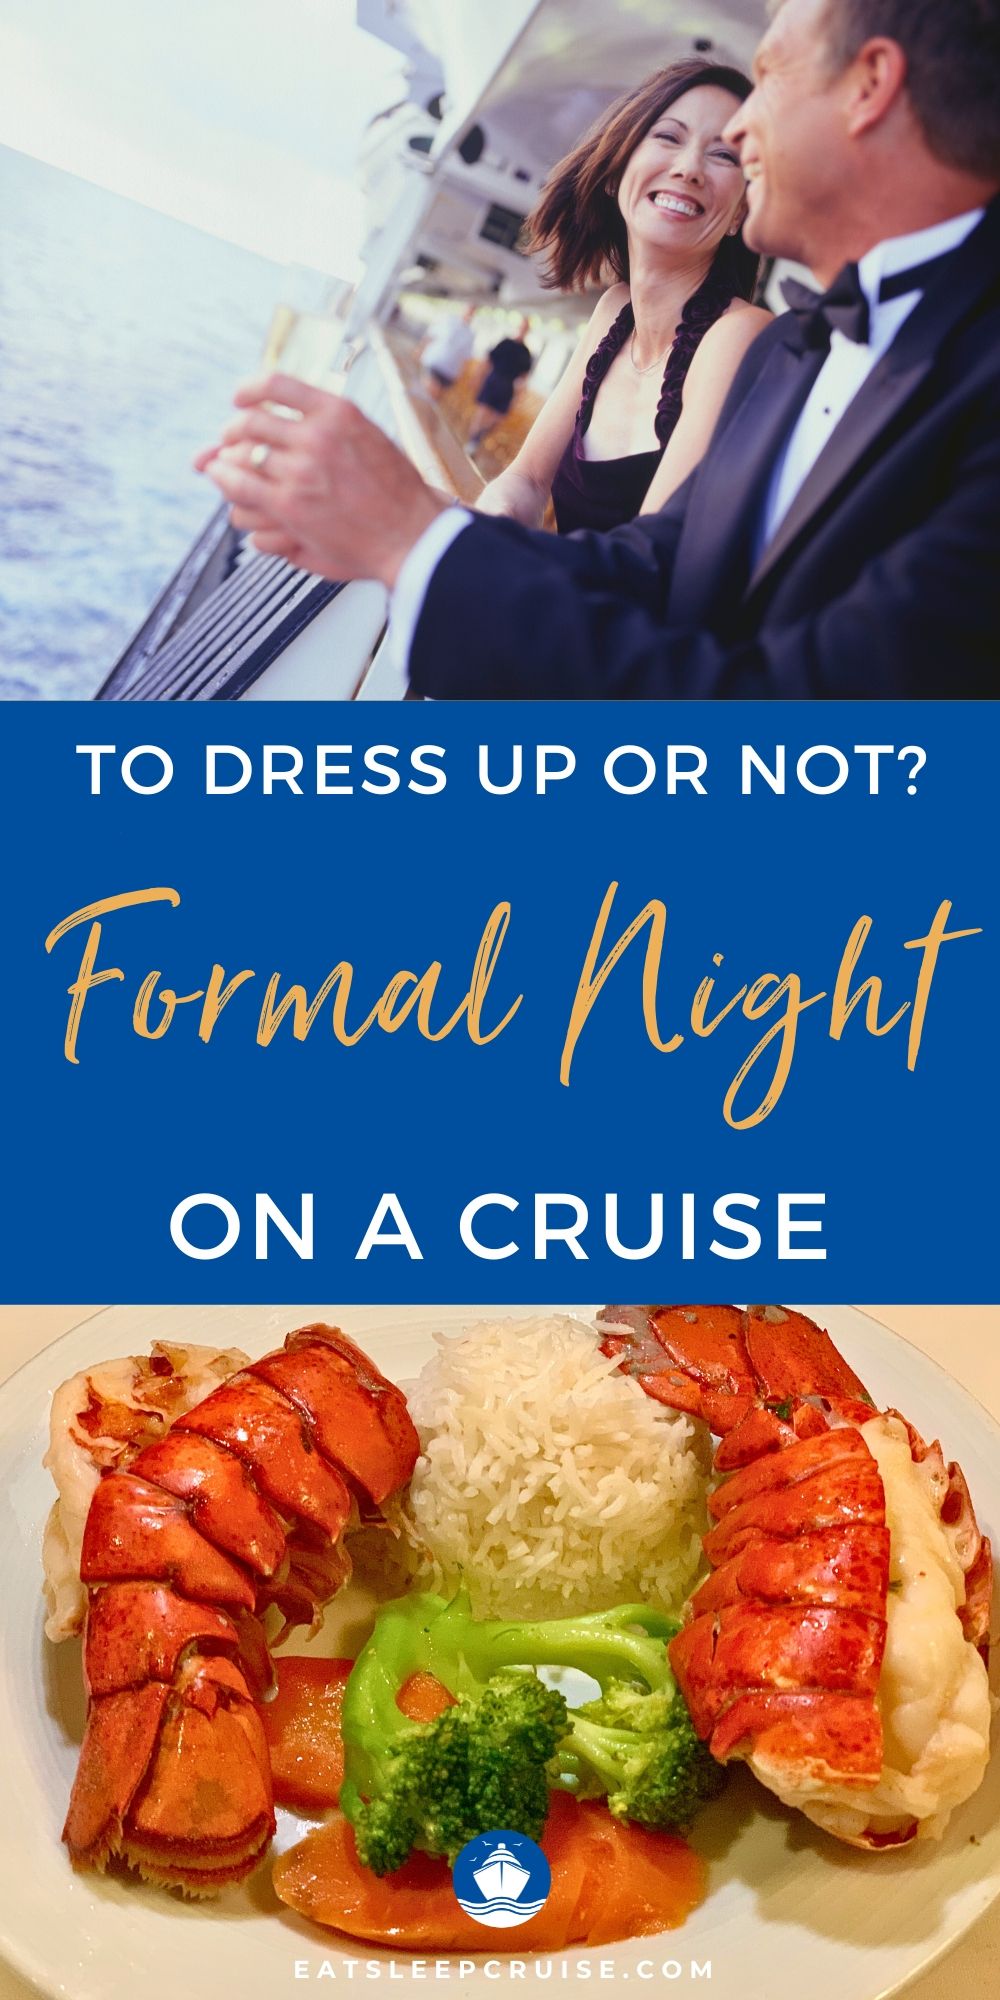 To Dress Up or Not: Guide to What to Wear on Cruise Formal Night